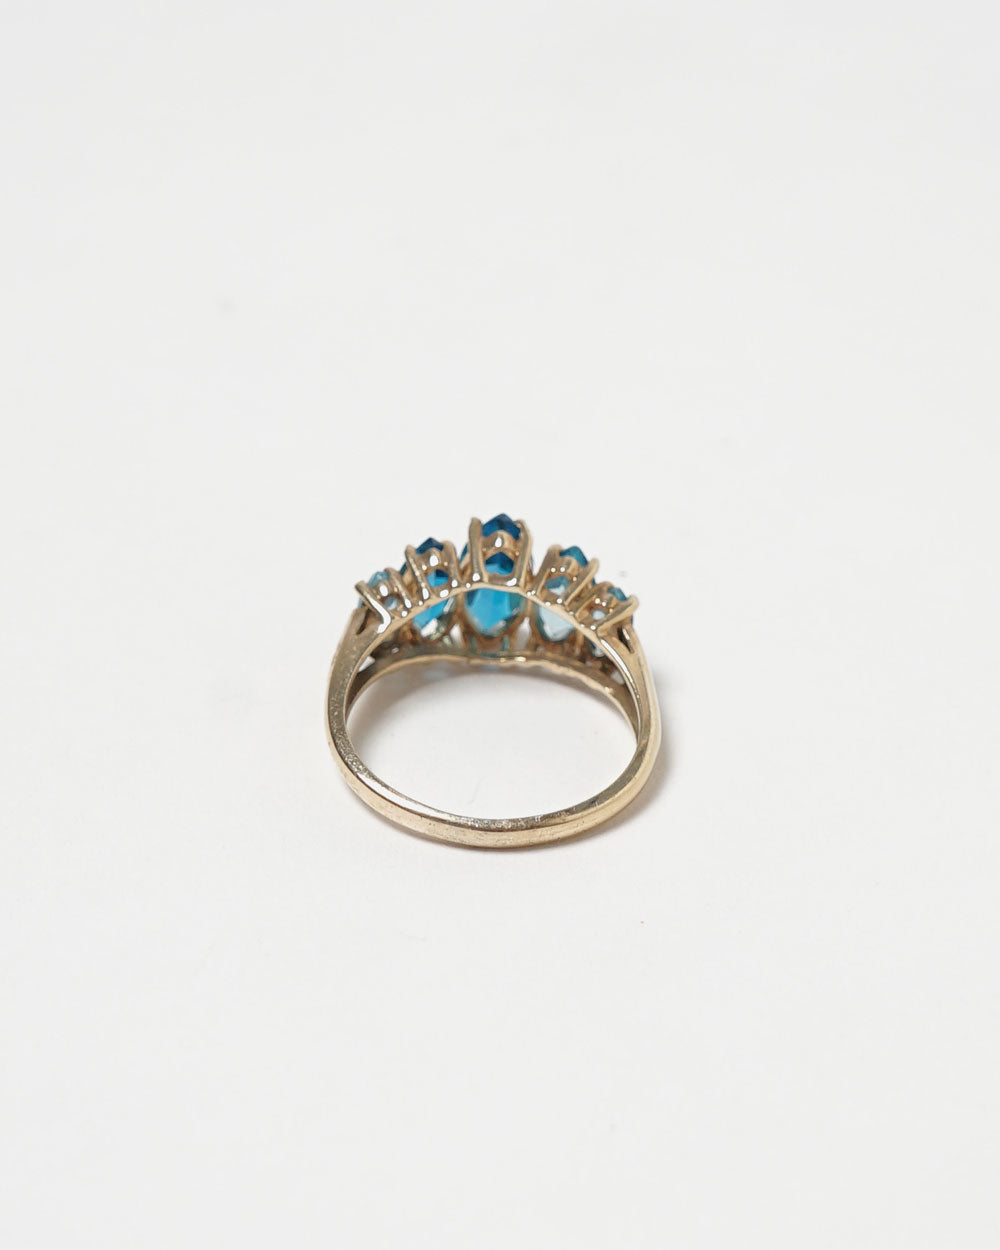 10k Gold Ring w/ Blue Topars / size: 7.75